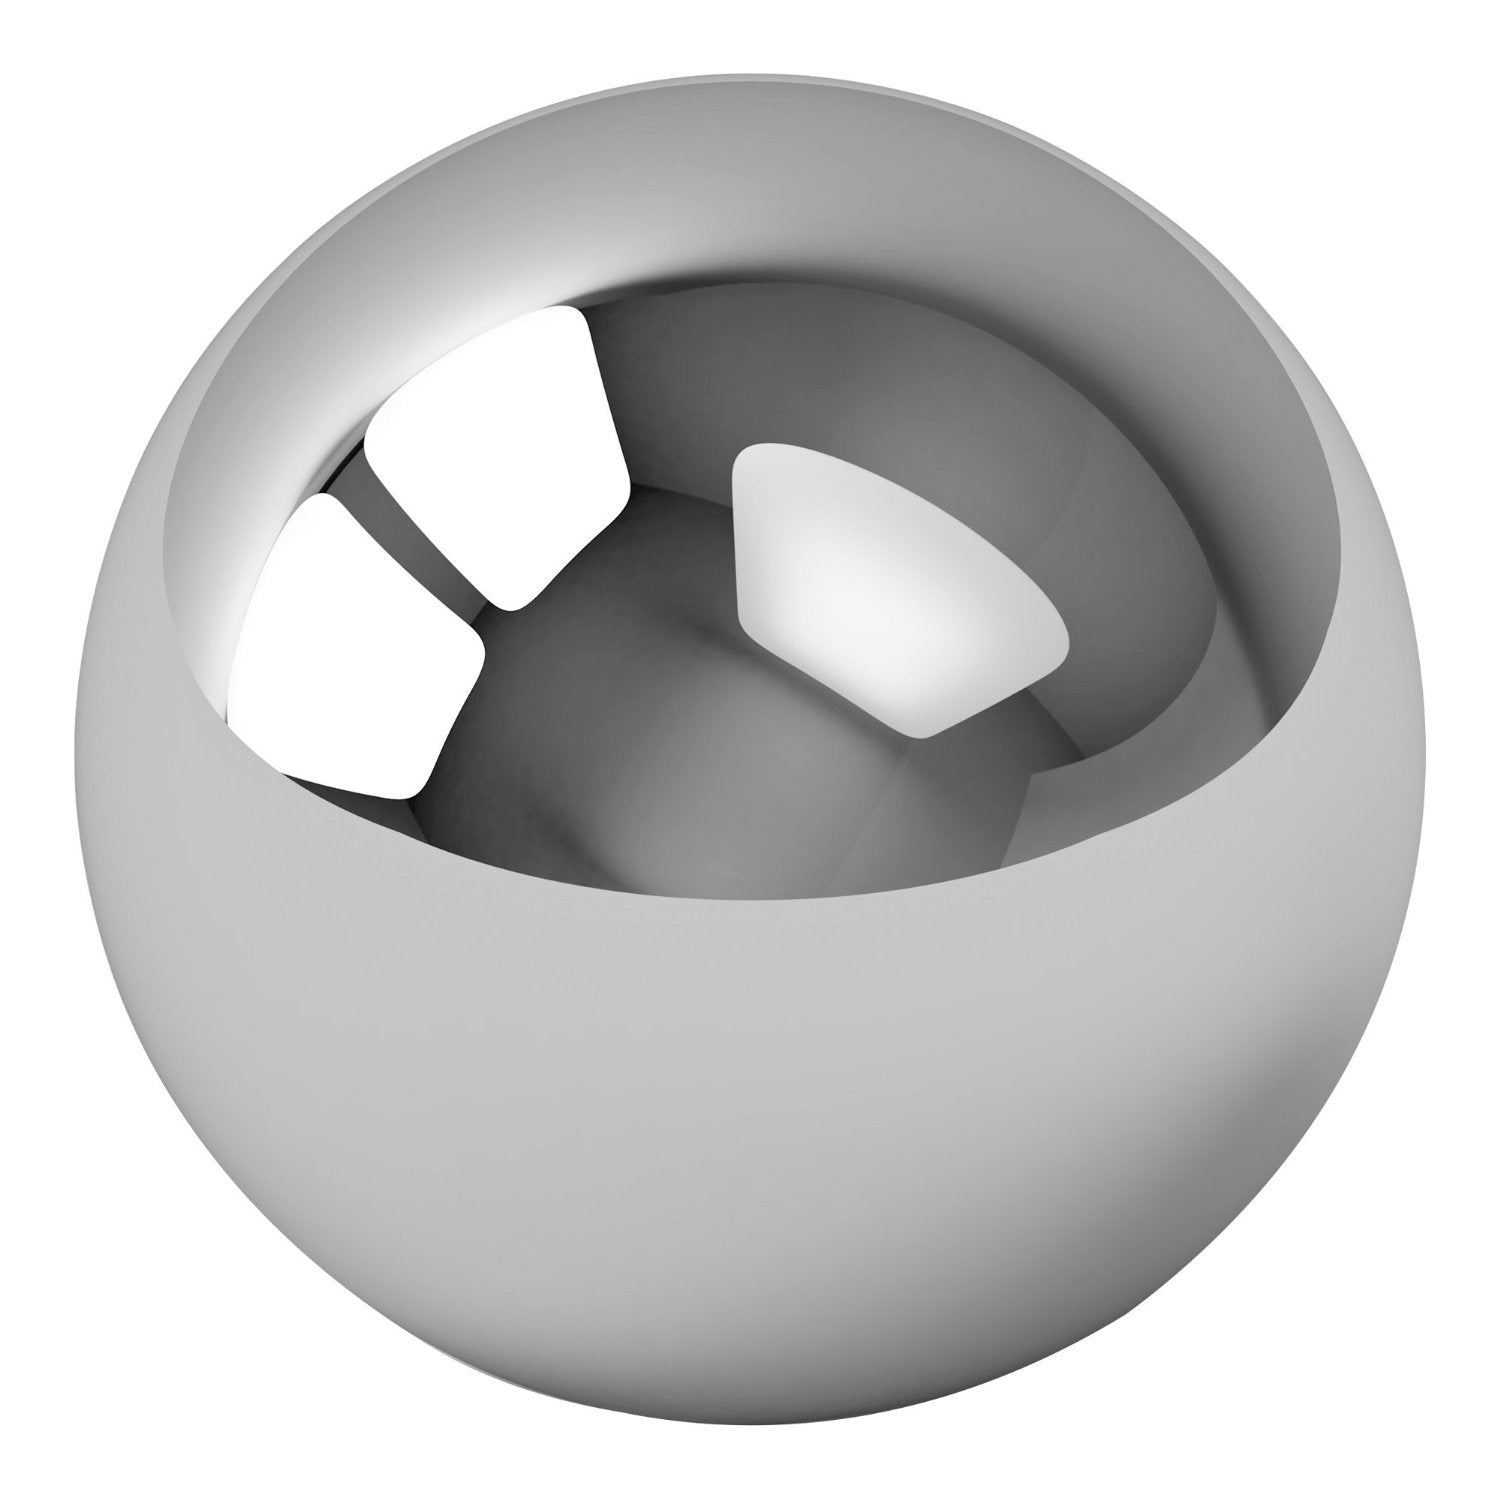 Stainless steel ball 5.556 mm (7/32")